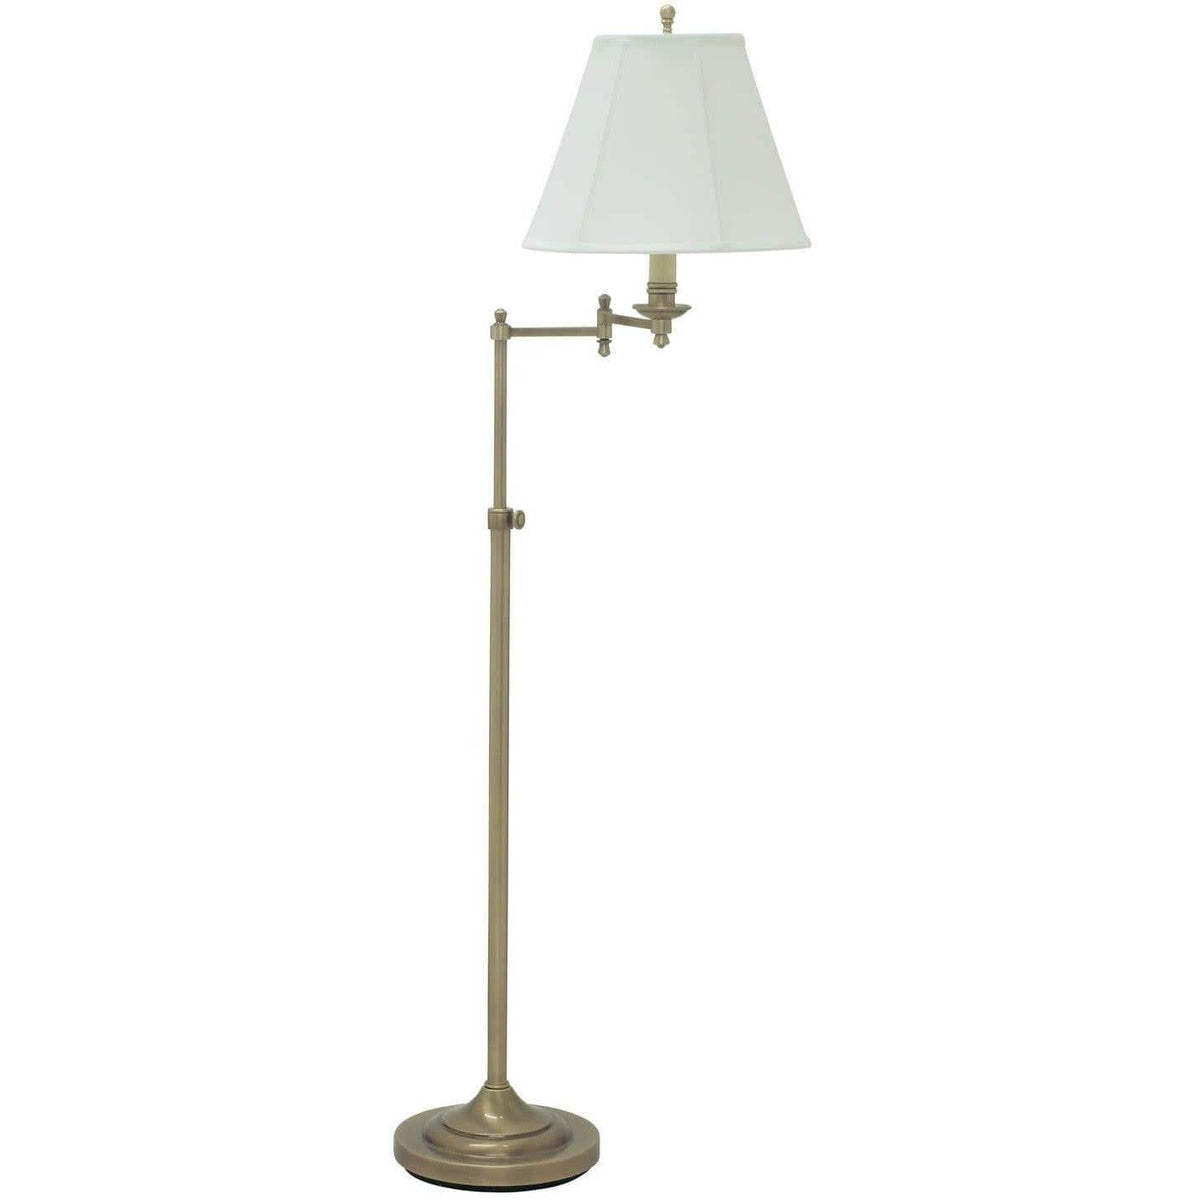 House of Troy - Club One Light Floor Lamp - CL200-AB | Montreal Lighting & Hardware